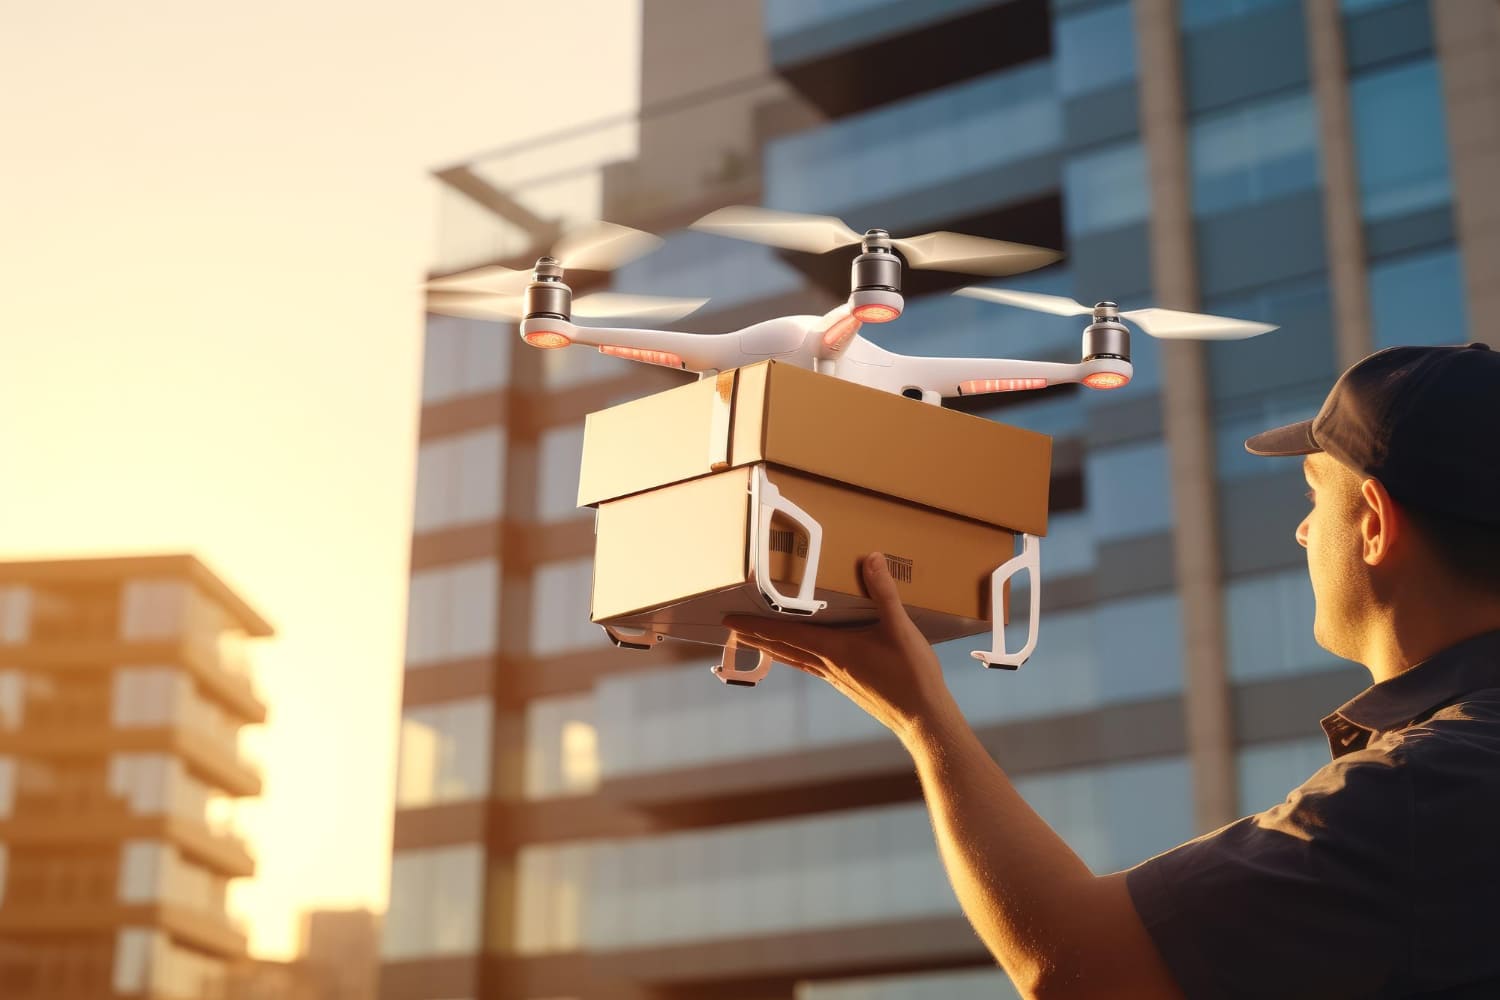 On-Demand Drone Delivery